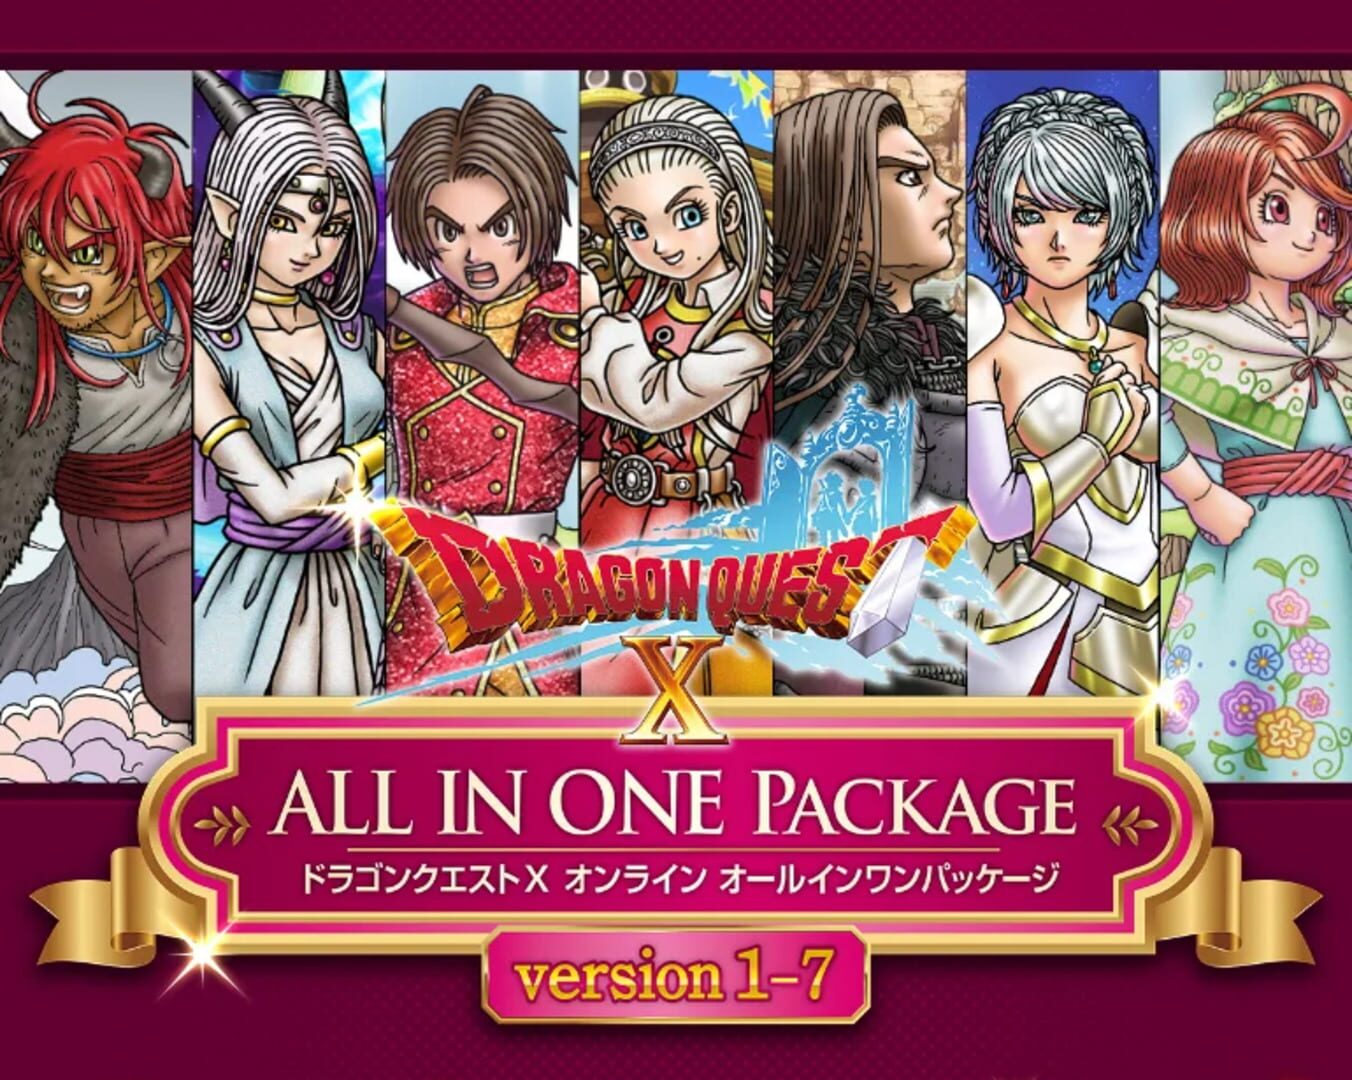 Captura de pantalla - Dragon Quest X: All In One Package - Versions 1-7